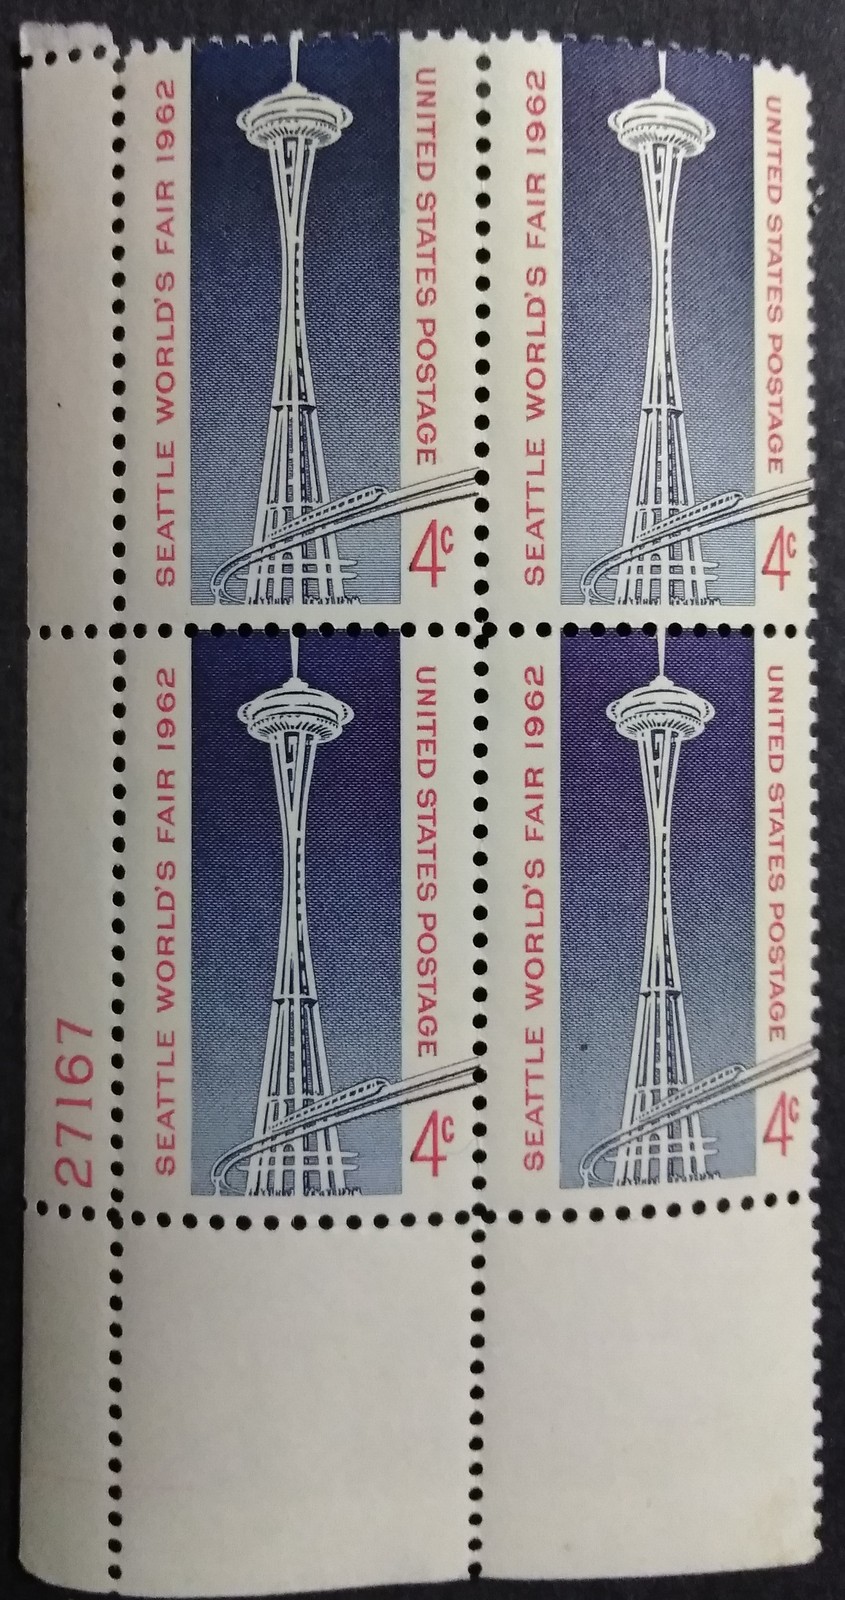 Primary image for Seattle World's Fair Set of Four Unused US Postage Stamps